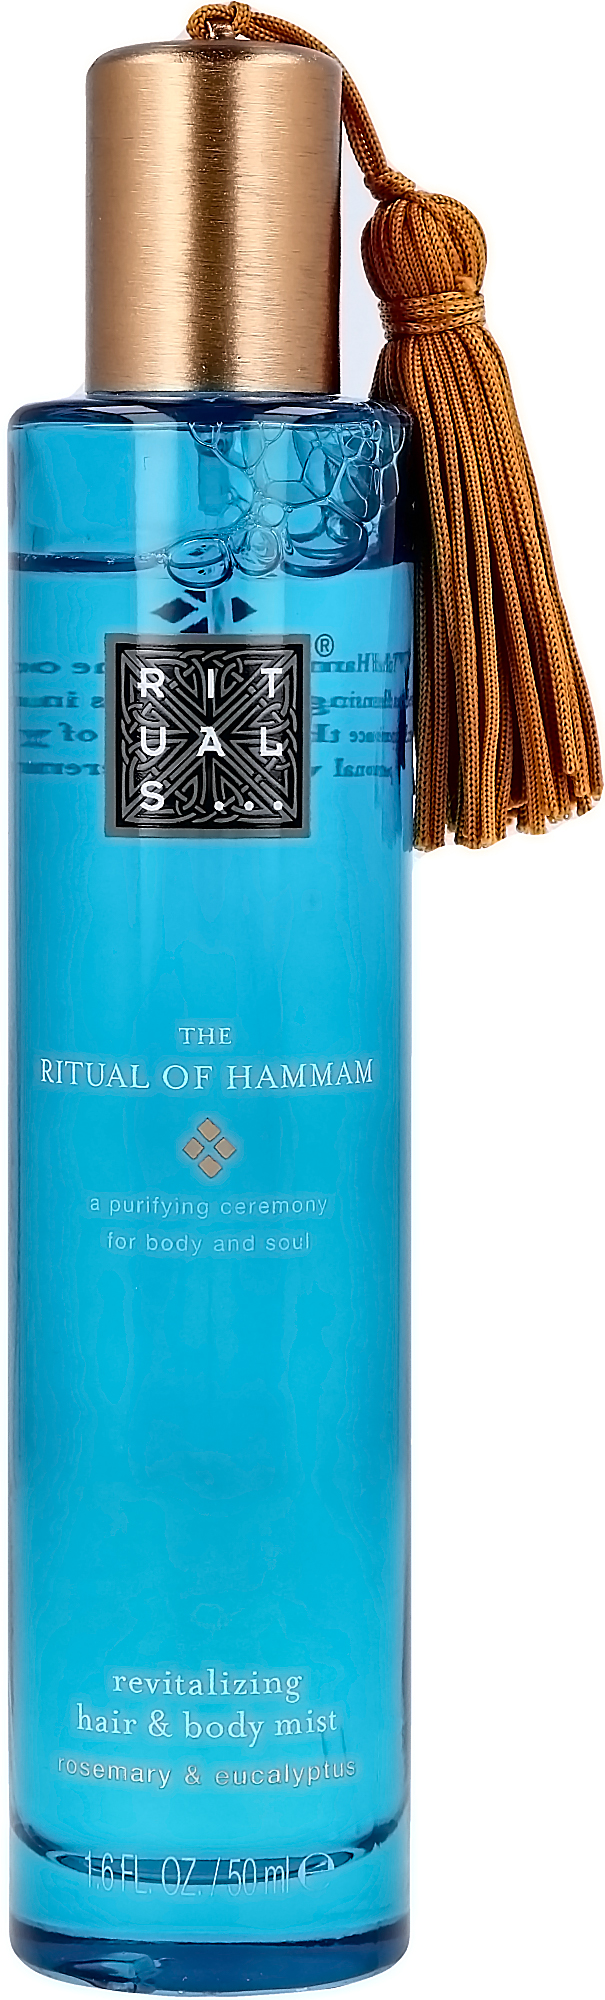 https://lyko.com/globalassets/product-images/rituals-the-ritual-of-hammam-hair--body-mist-50-ml-1808-453-0050_1.jpg?ref=ADC98B6AFF